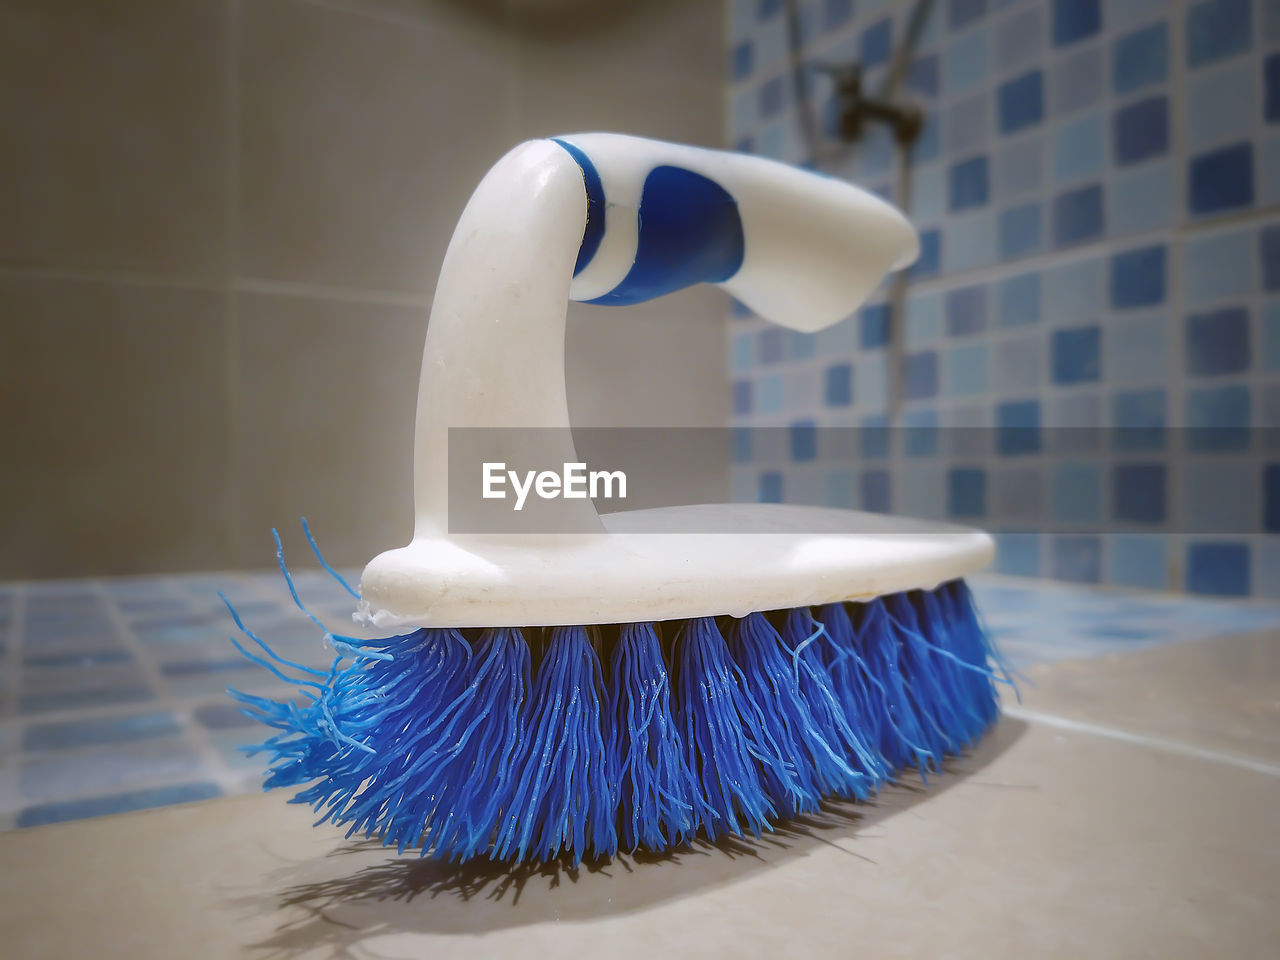 brush, blue, hygiene, cleaning, bathroom, indoors, domestic room, flooring, home, domestic bathroom, toothbrush, personal care, no people, domestic life, housework, cleaning equipment, tile, bird, broom, home interior